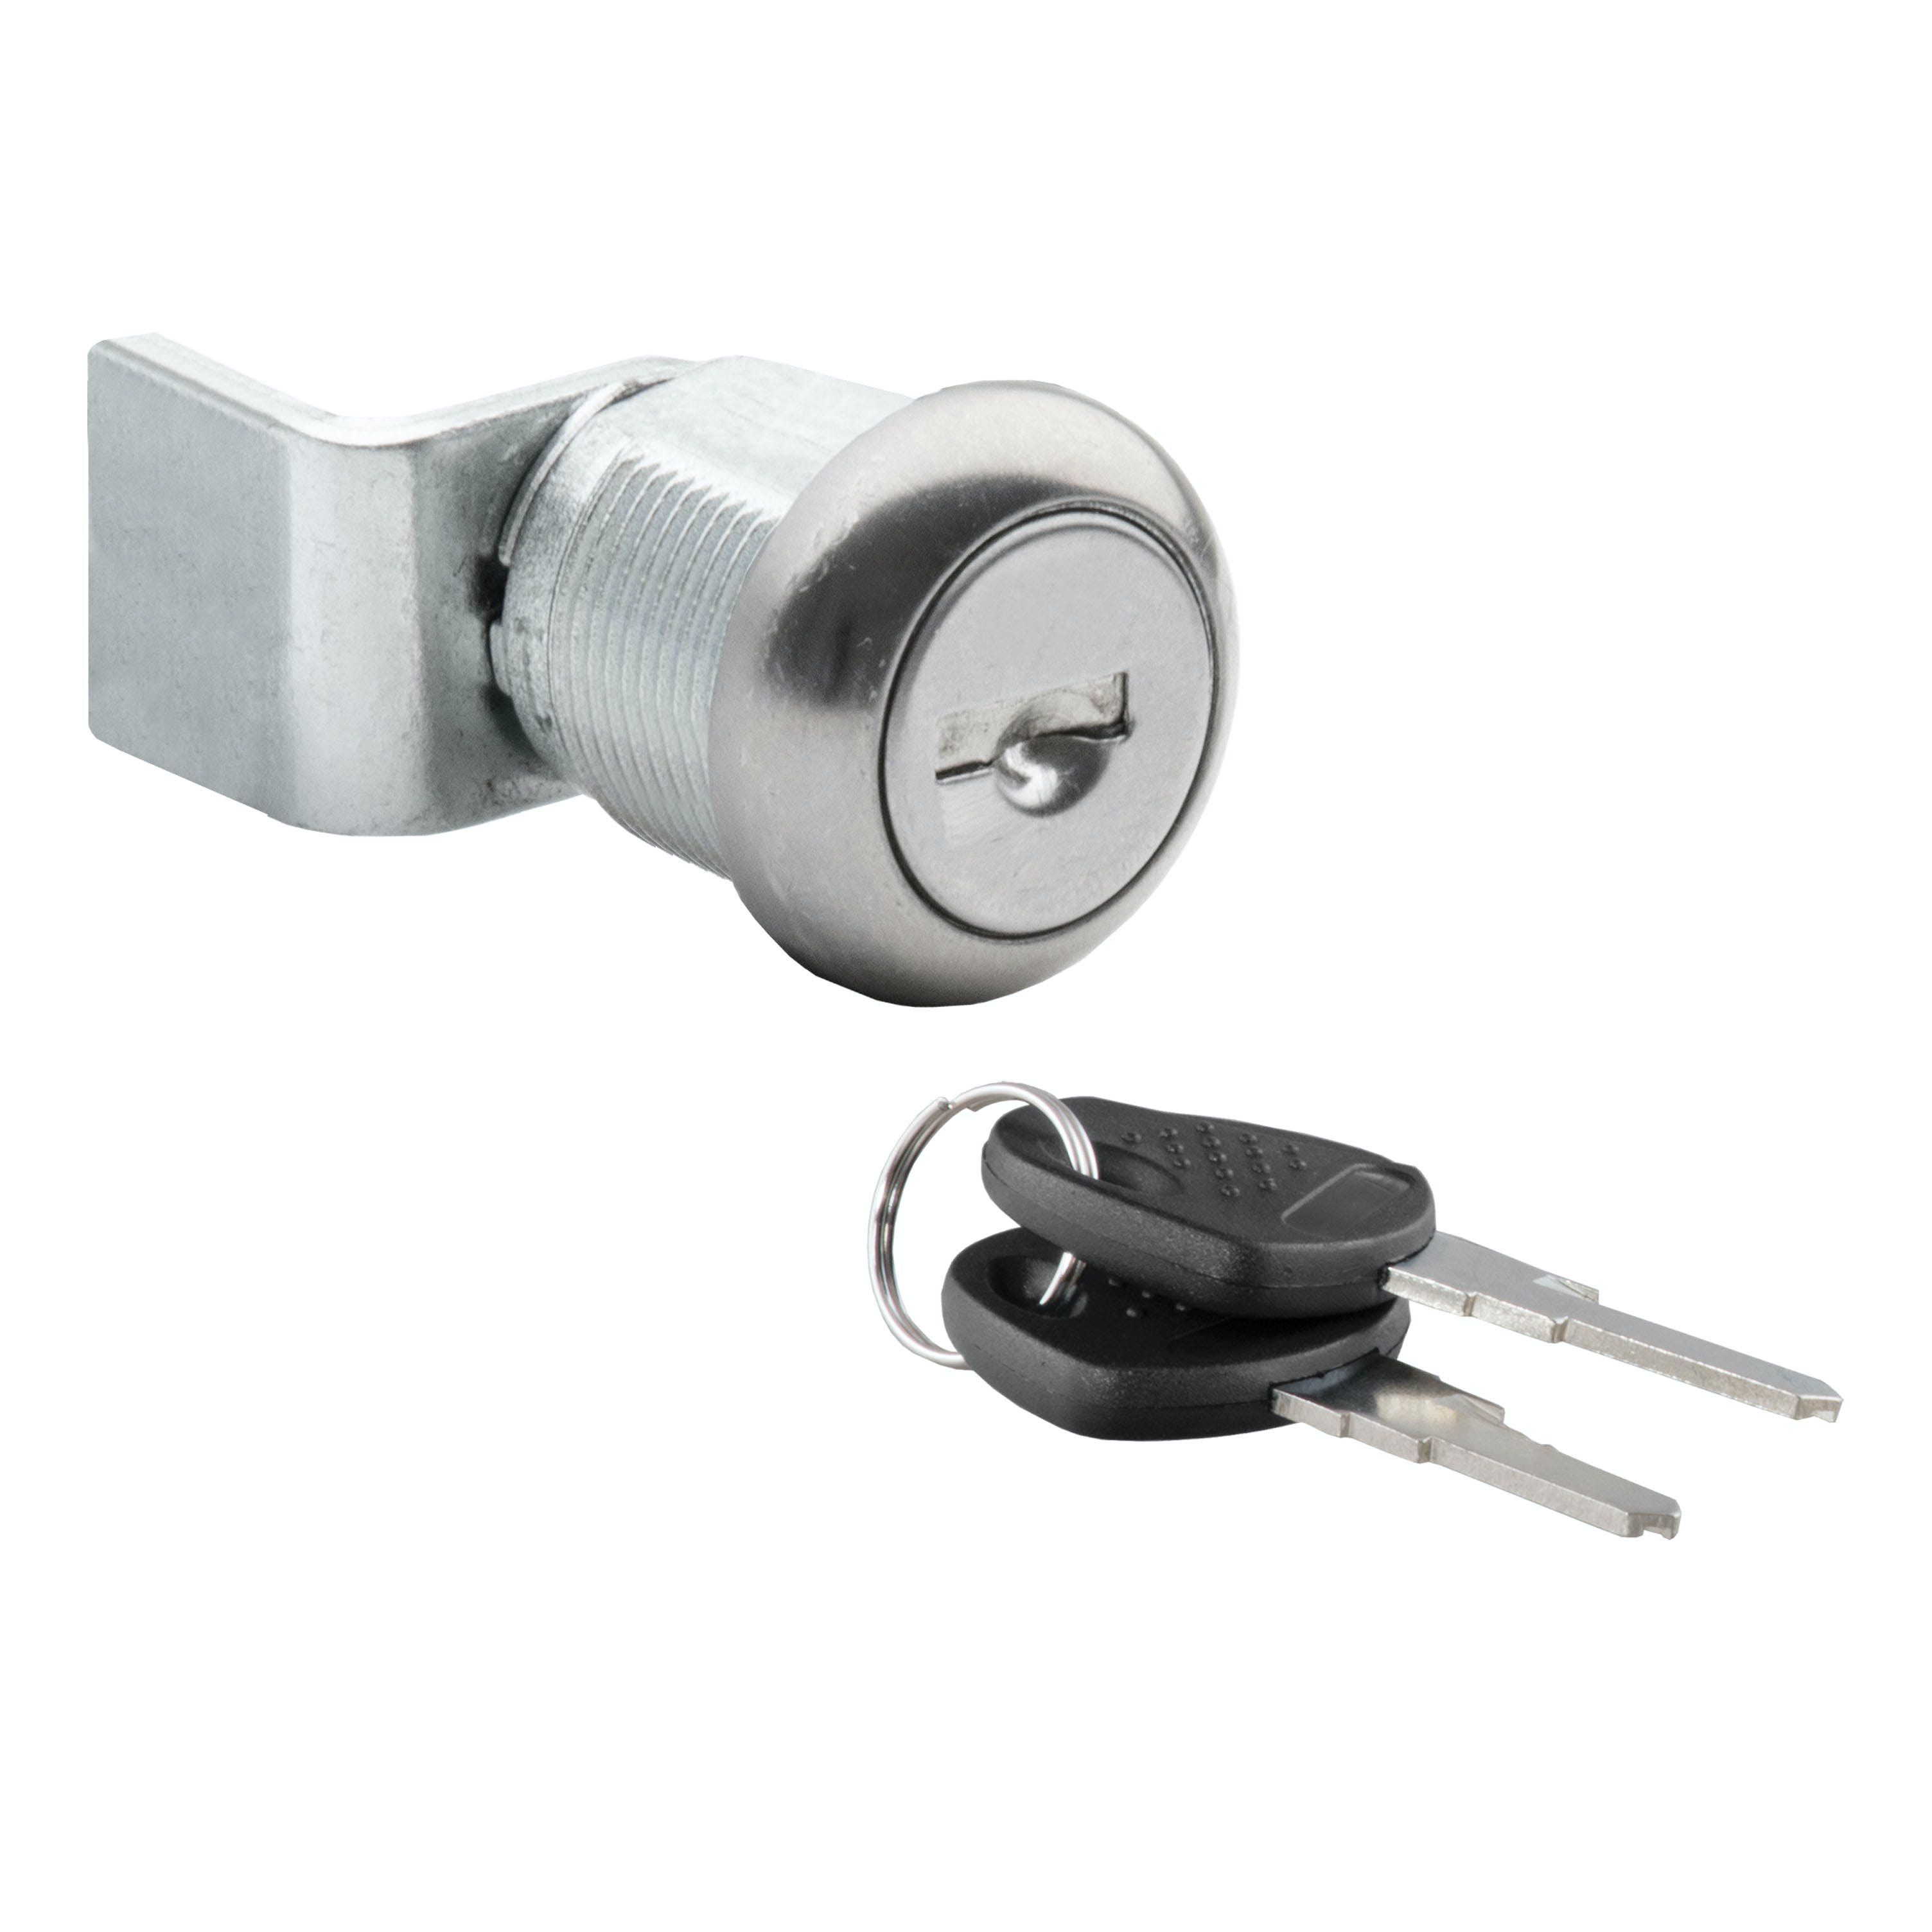 UWS 003-RYTHCY-004 Replacement T-Handle Lock Cylinder and Keys